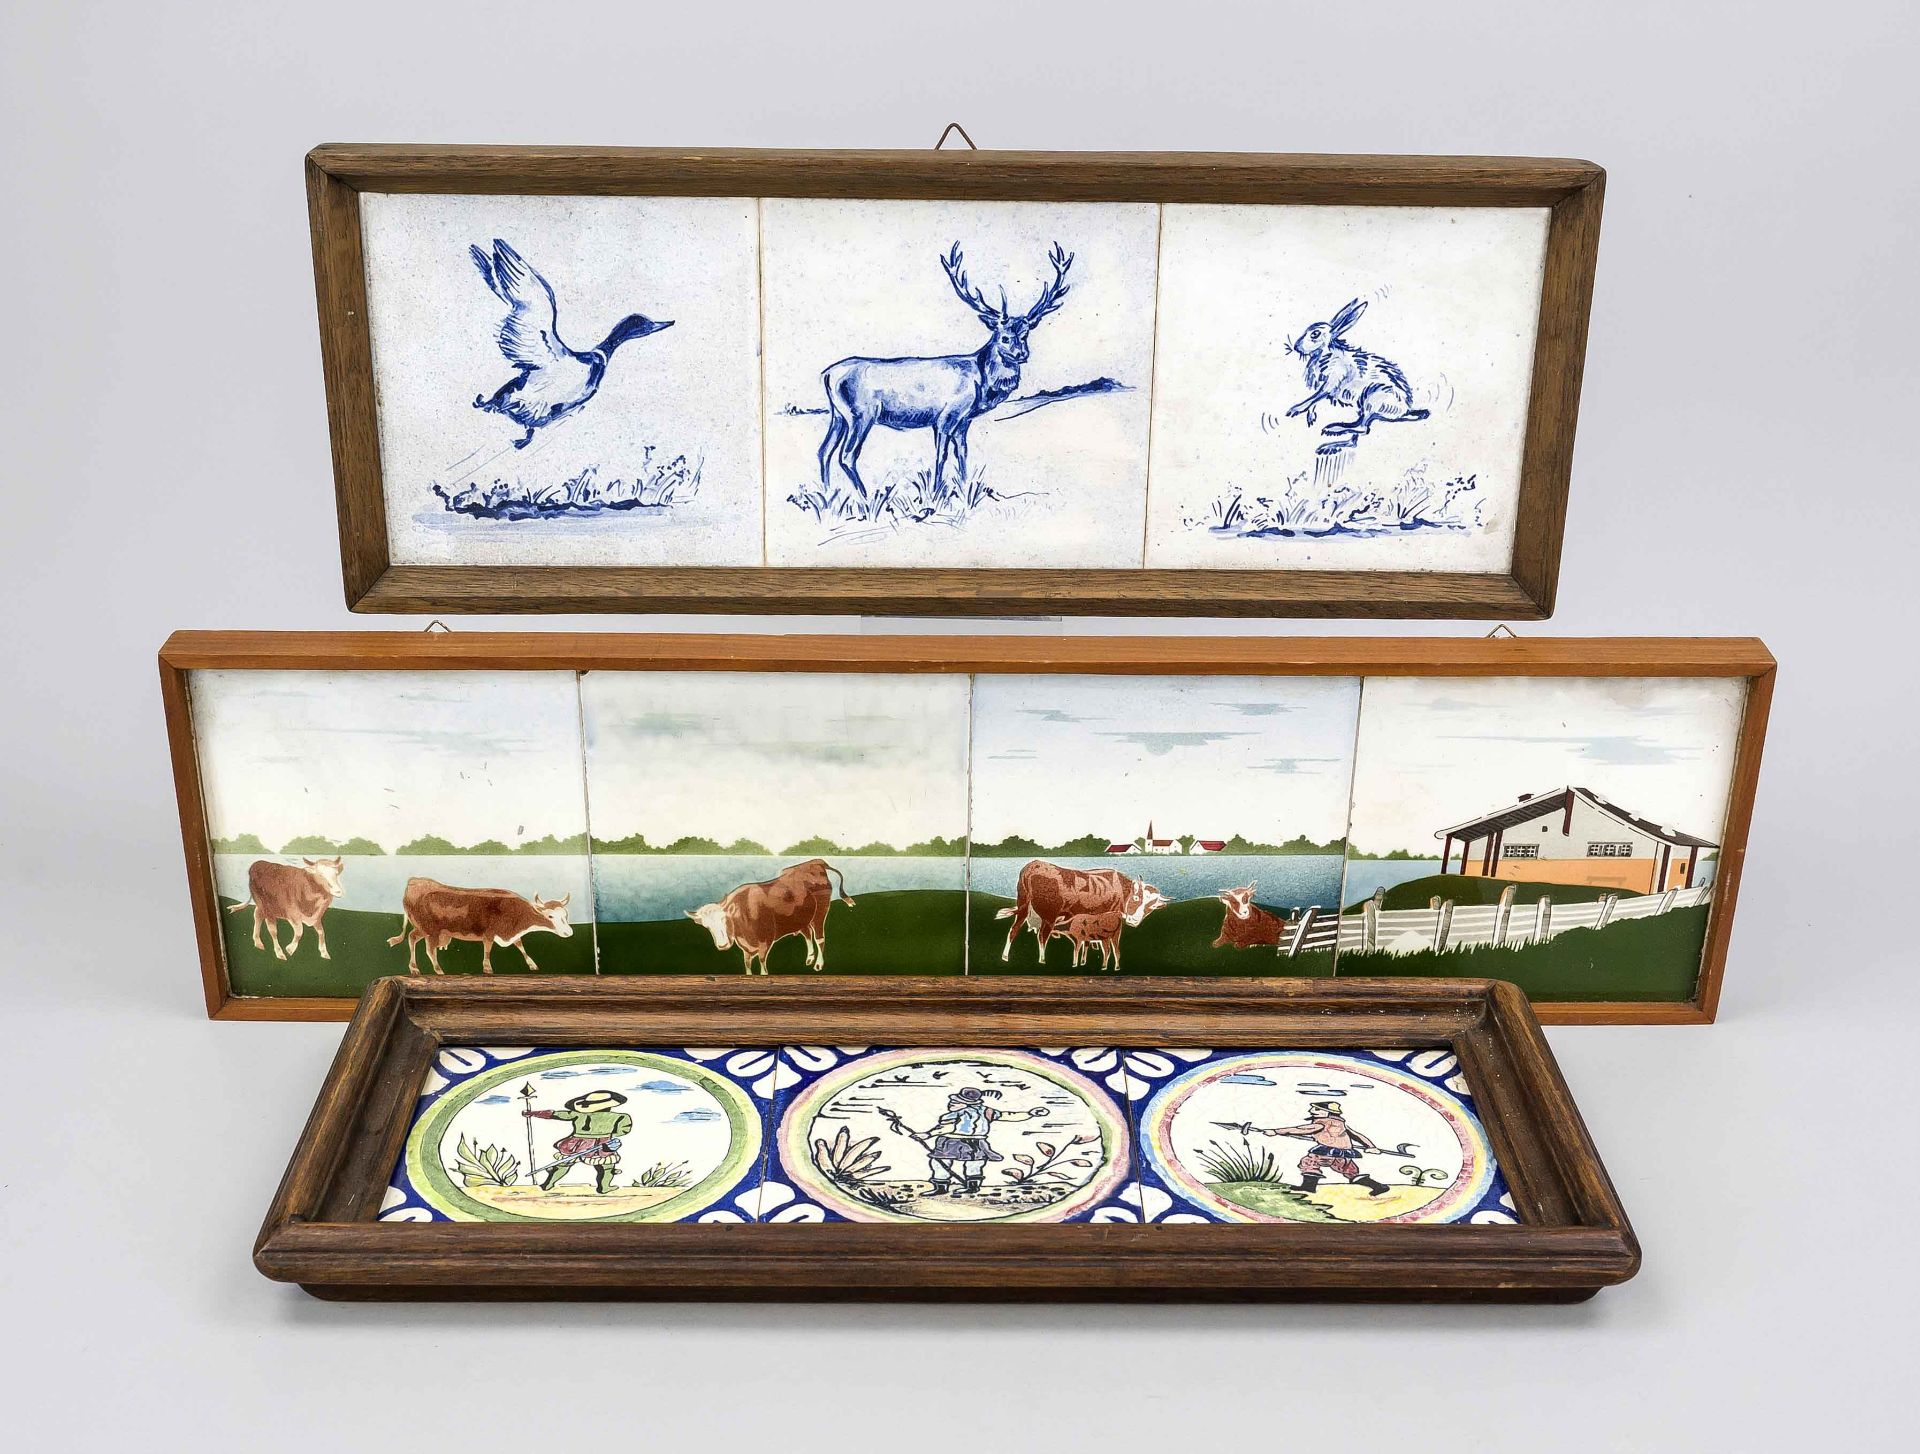 3 tile pictures, Holland 19th/20th century, 2 x 3 and 1 x 4 tiles with polychrome and cobalt blue